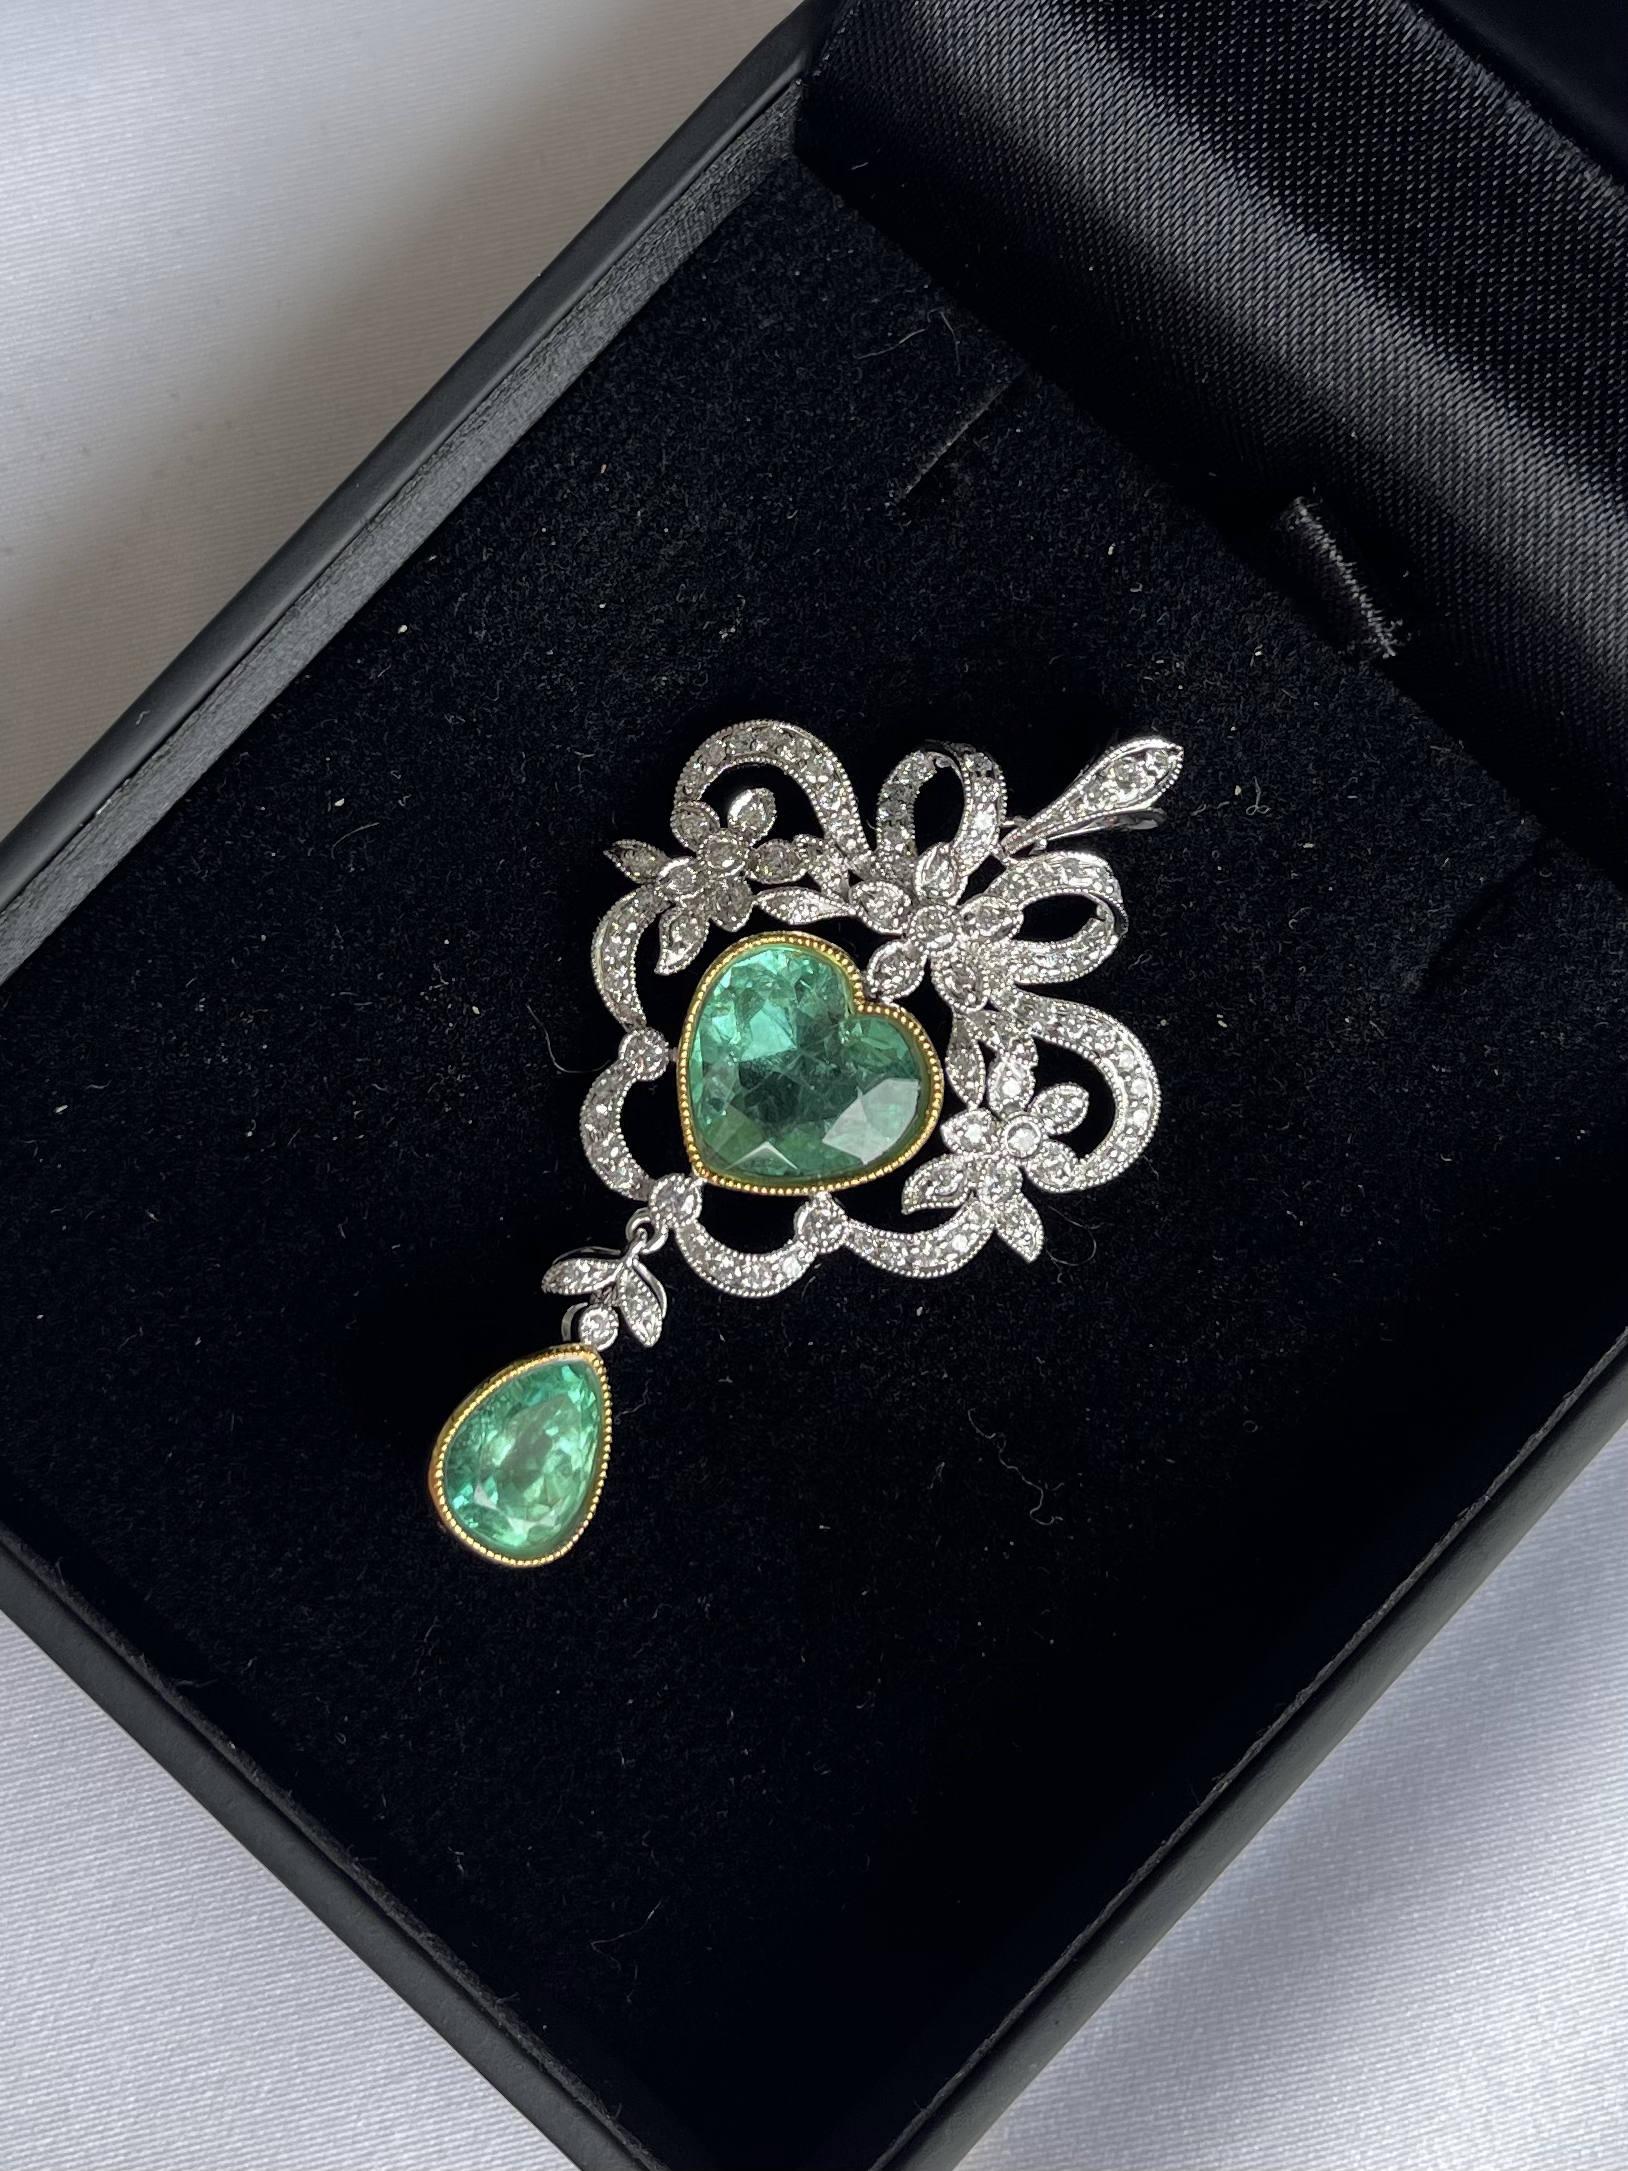 Colombian (based on my opinion) emerald and diamond, crafted in eighteen karat white gold, featuring a beautiful selection of ninety-one bead set and rub over set natural round brilliant cut diamonds. complimented with a polished finish